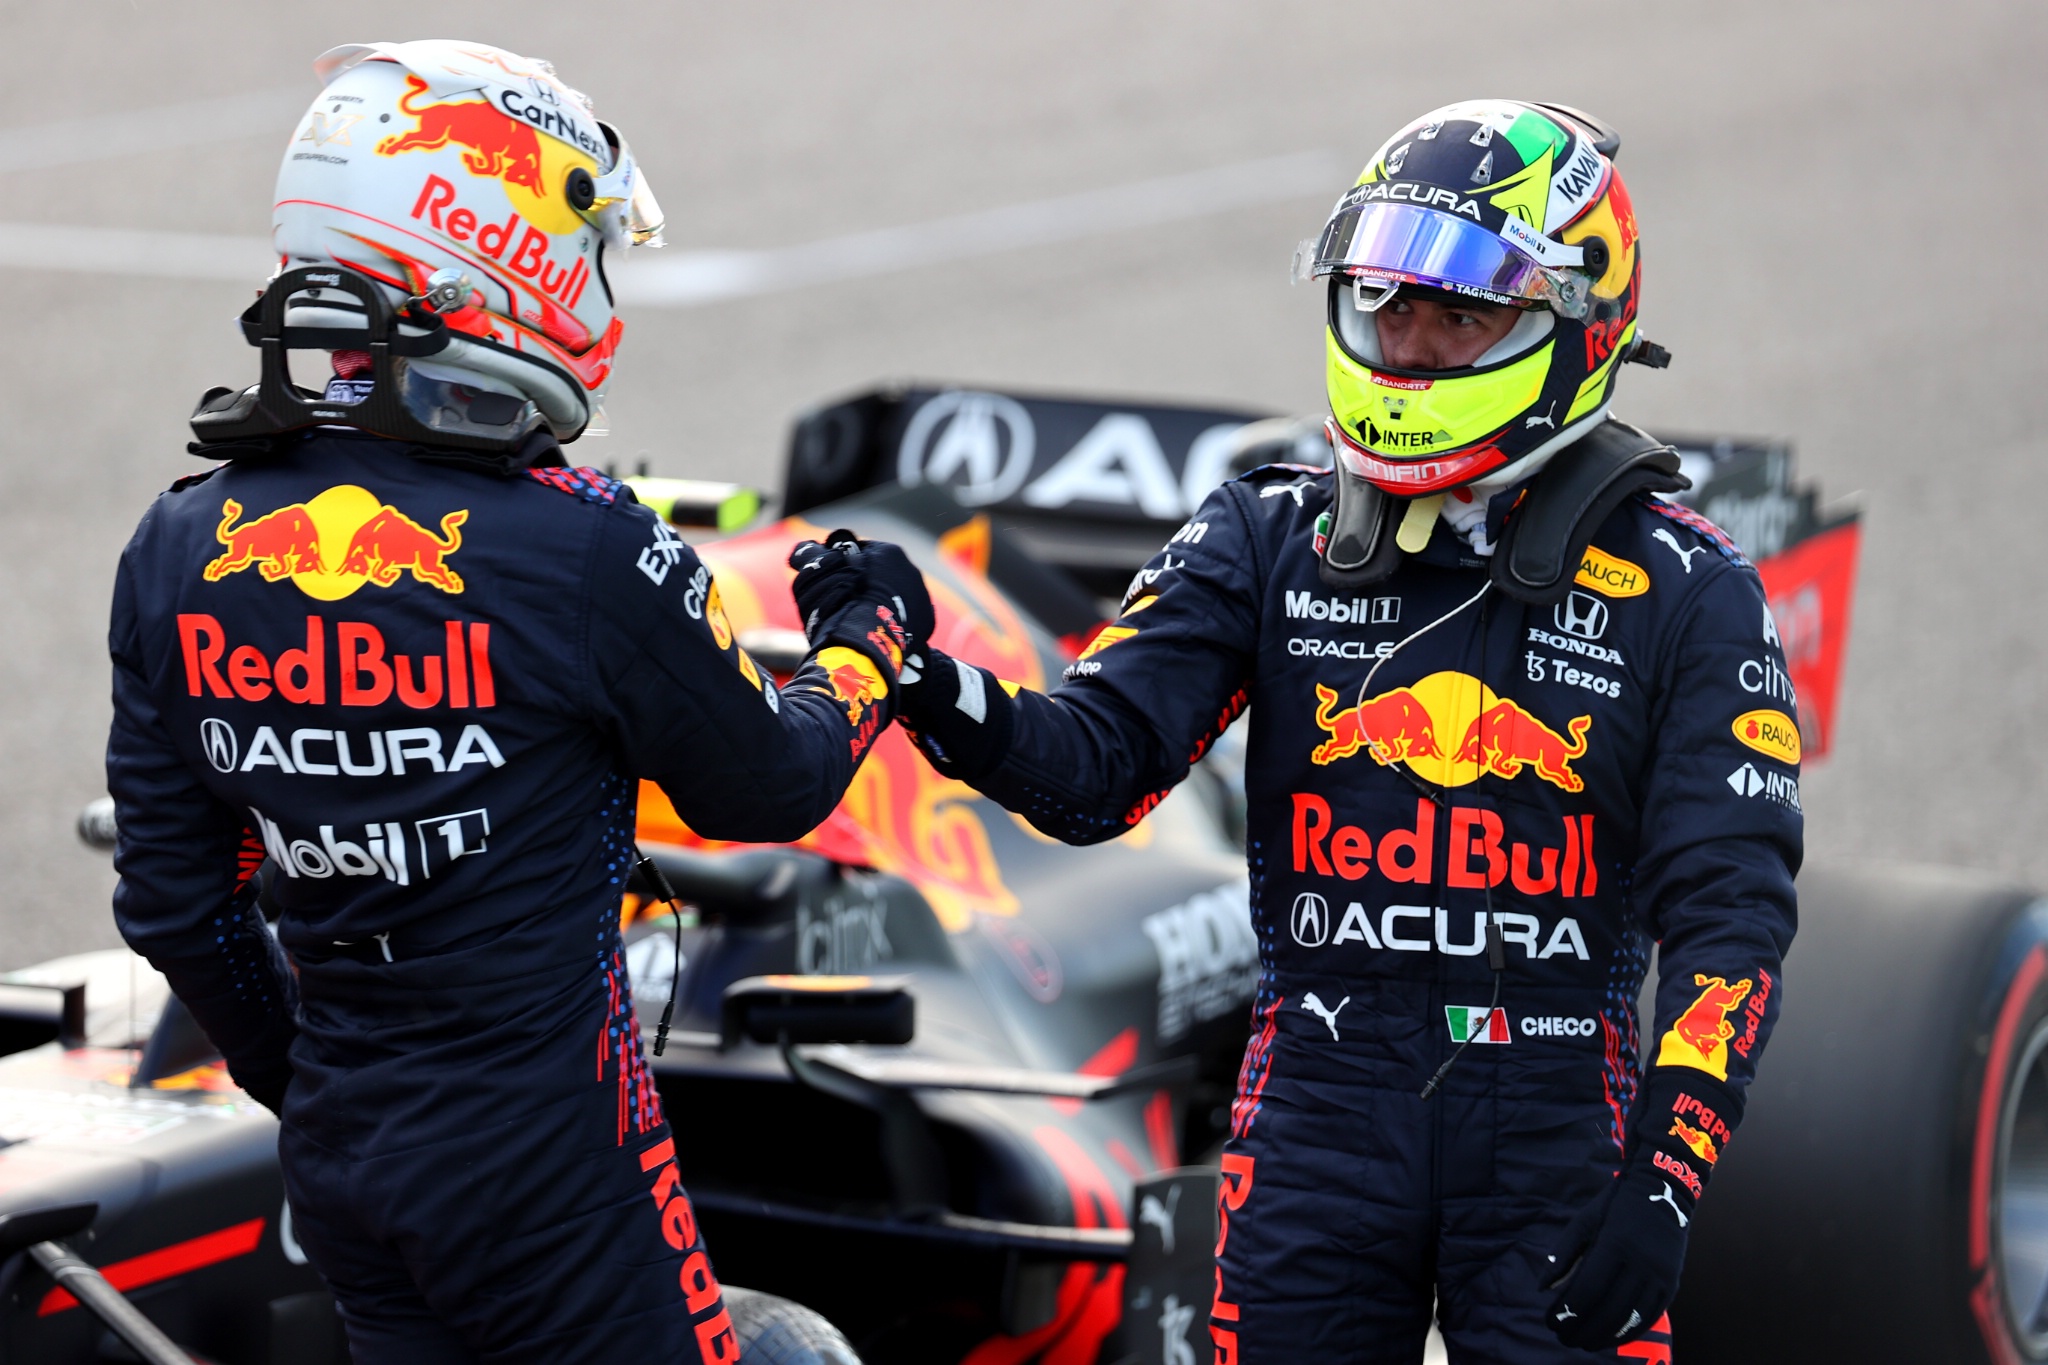 Pole for Max Verstappen (NLD) Red Bull Racing RB16B and 3rd for Sergio Perez (MEX) Red Bull Racing RB16B.